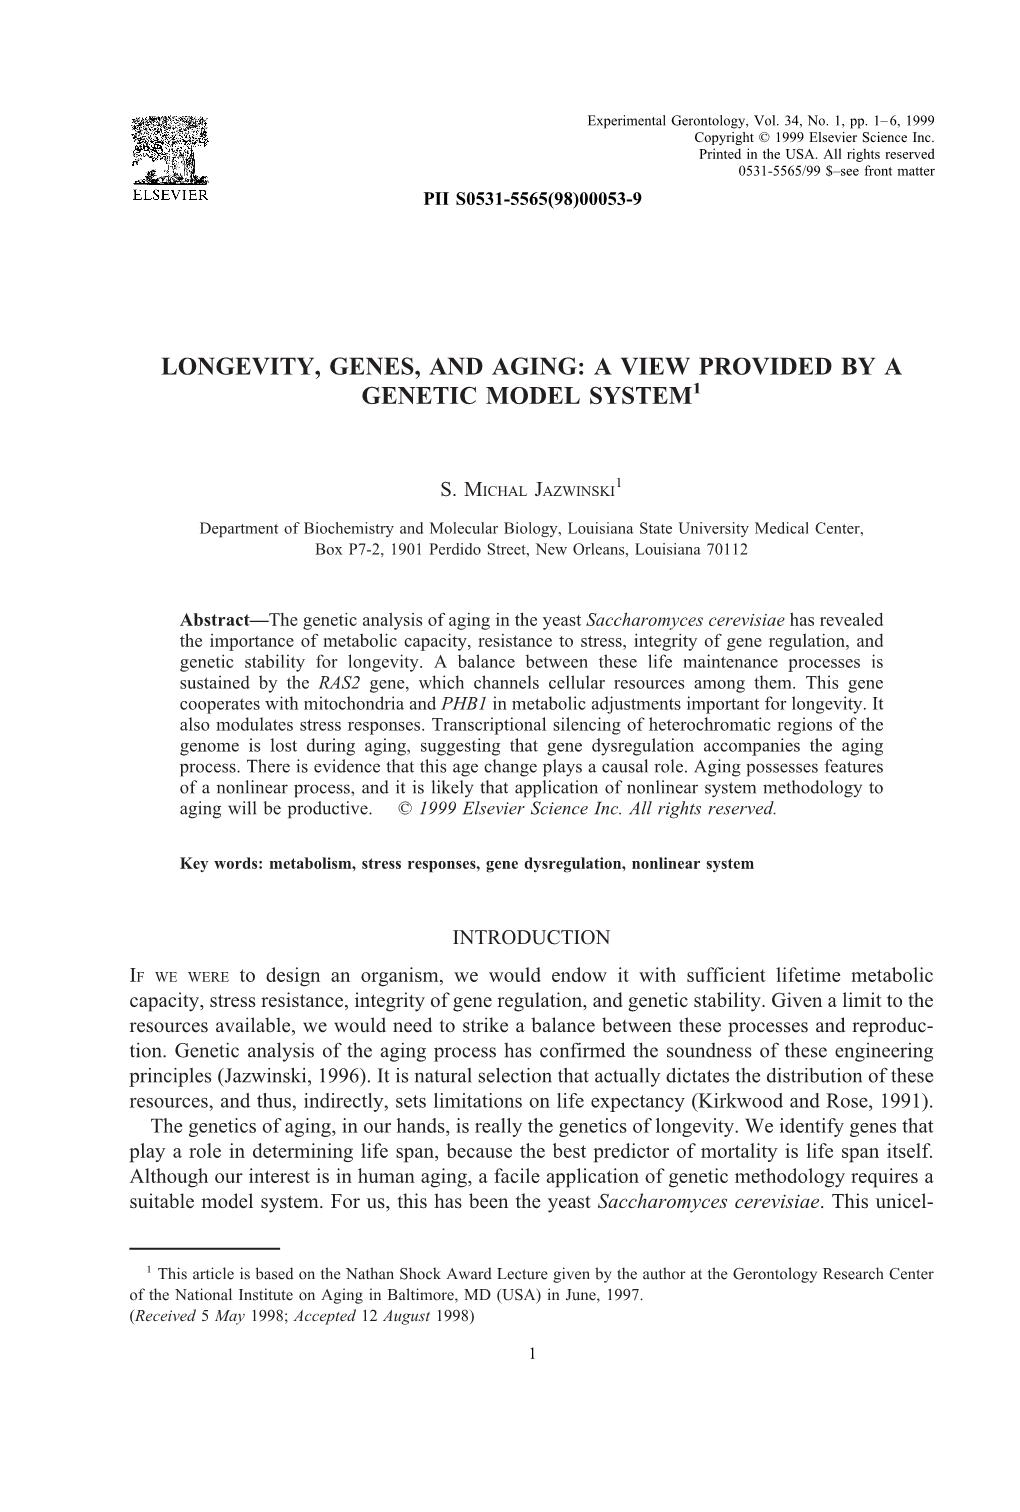 Longevity, Genes, and Aging: a View Provided by a Genetic Model System1